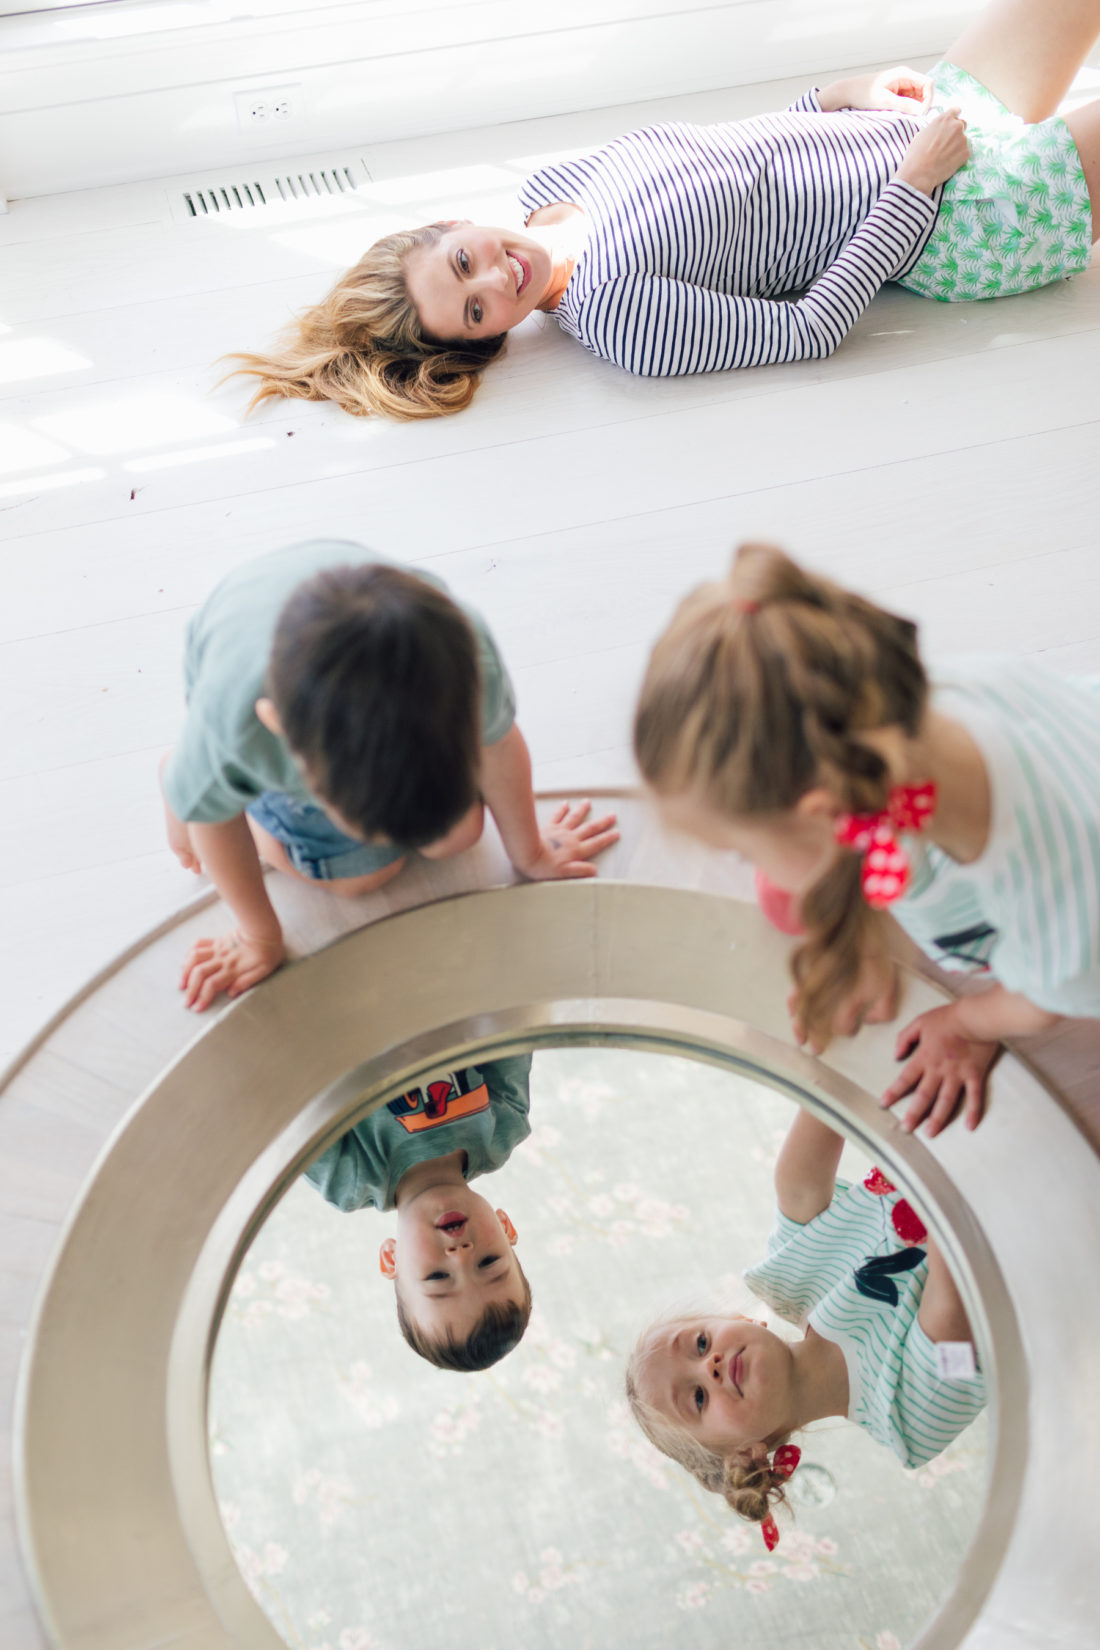 Eva Amurri Martino's kids Marlowe and Major look into a mirror in their new home in Connecticut